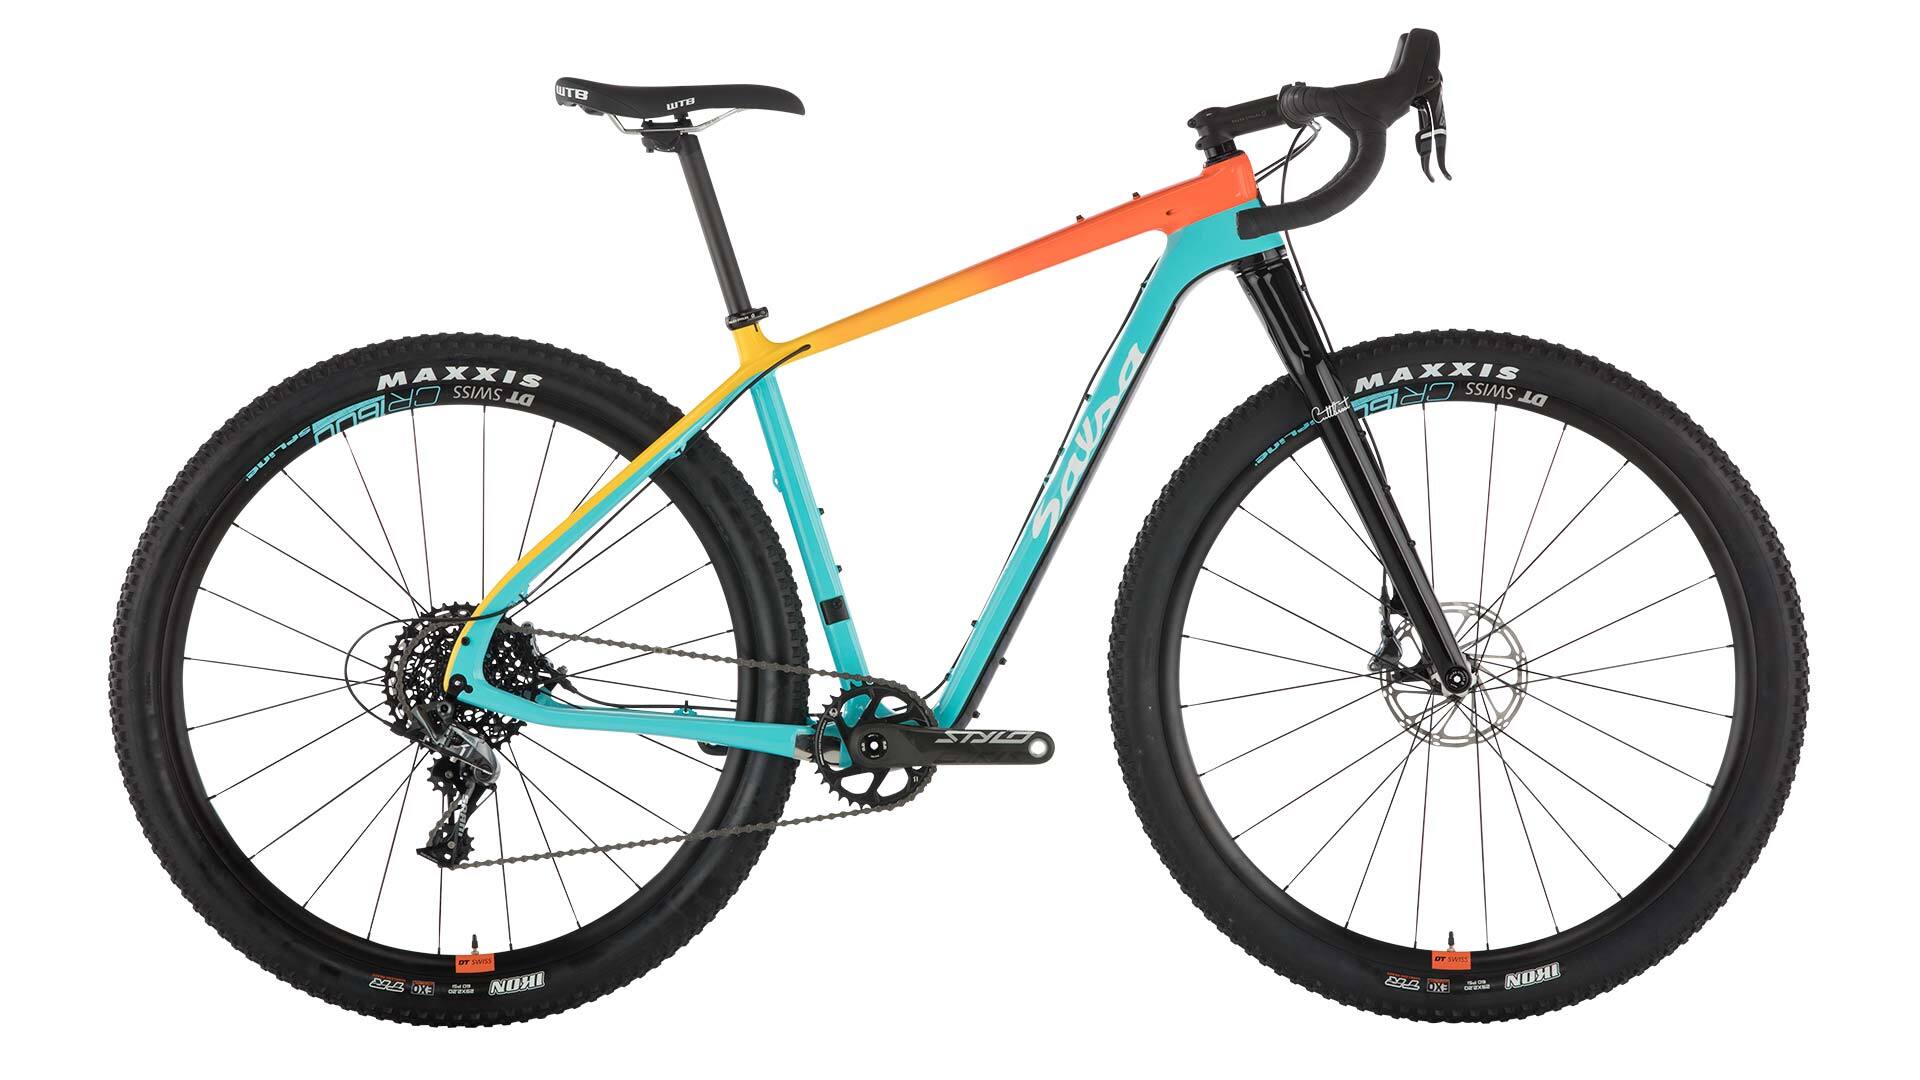 Cutthroat Force 1 Salsa Cycles